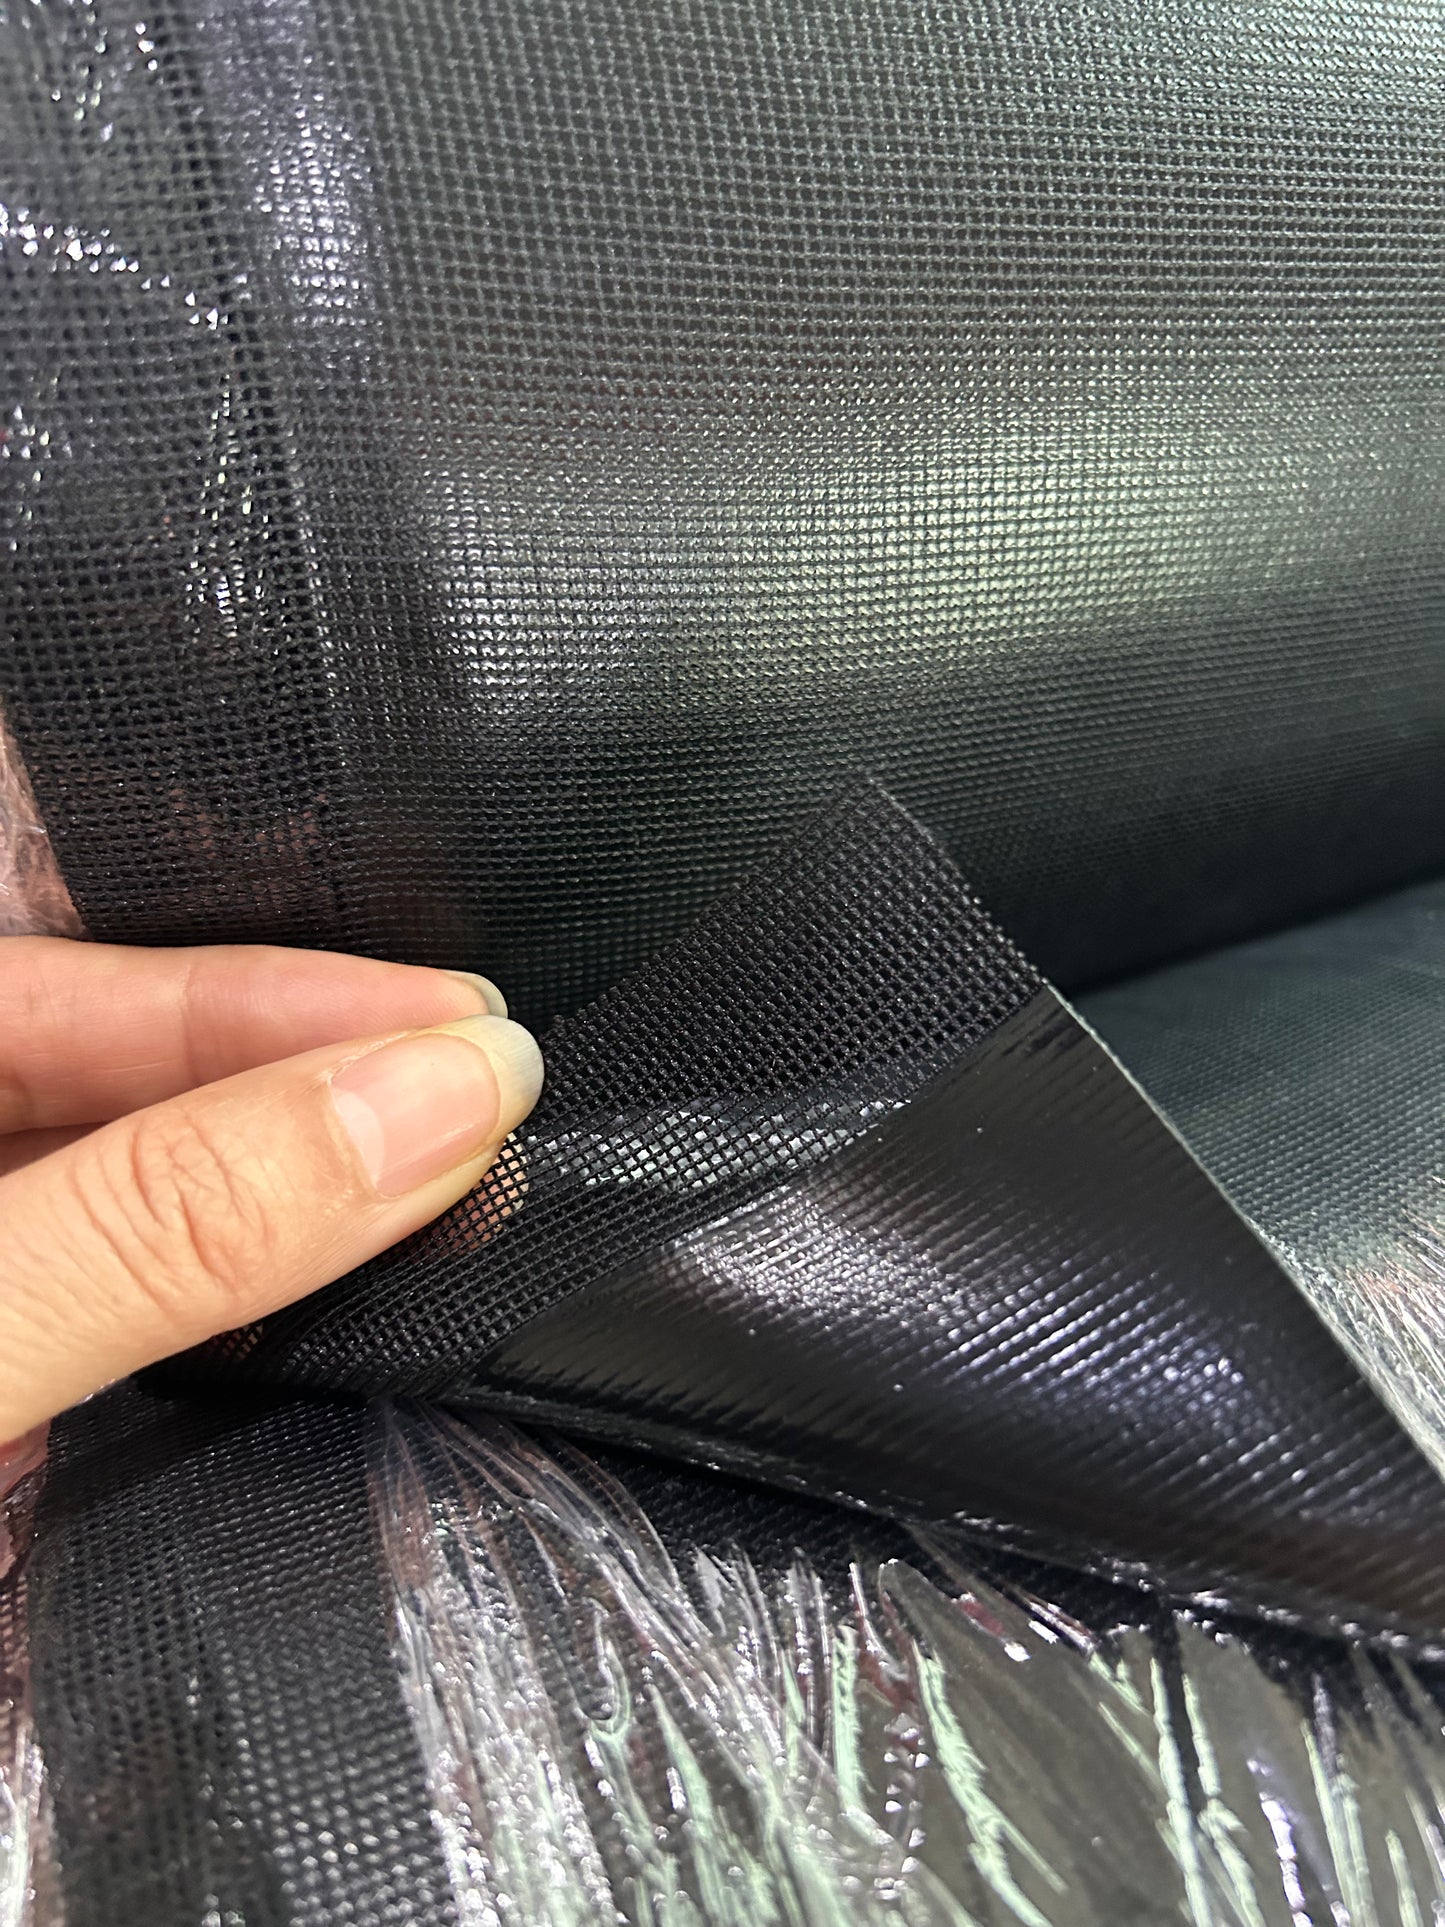 Ectrically Conductive Rubber Sheet With Mesh